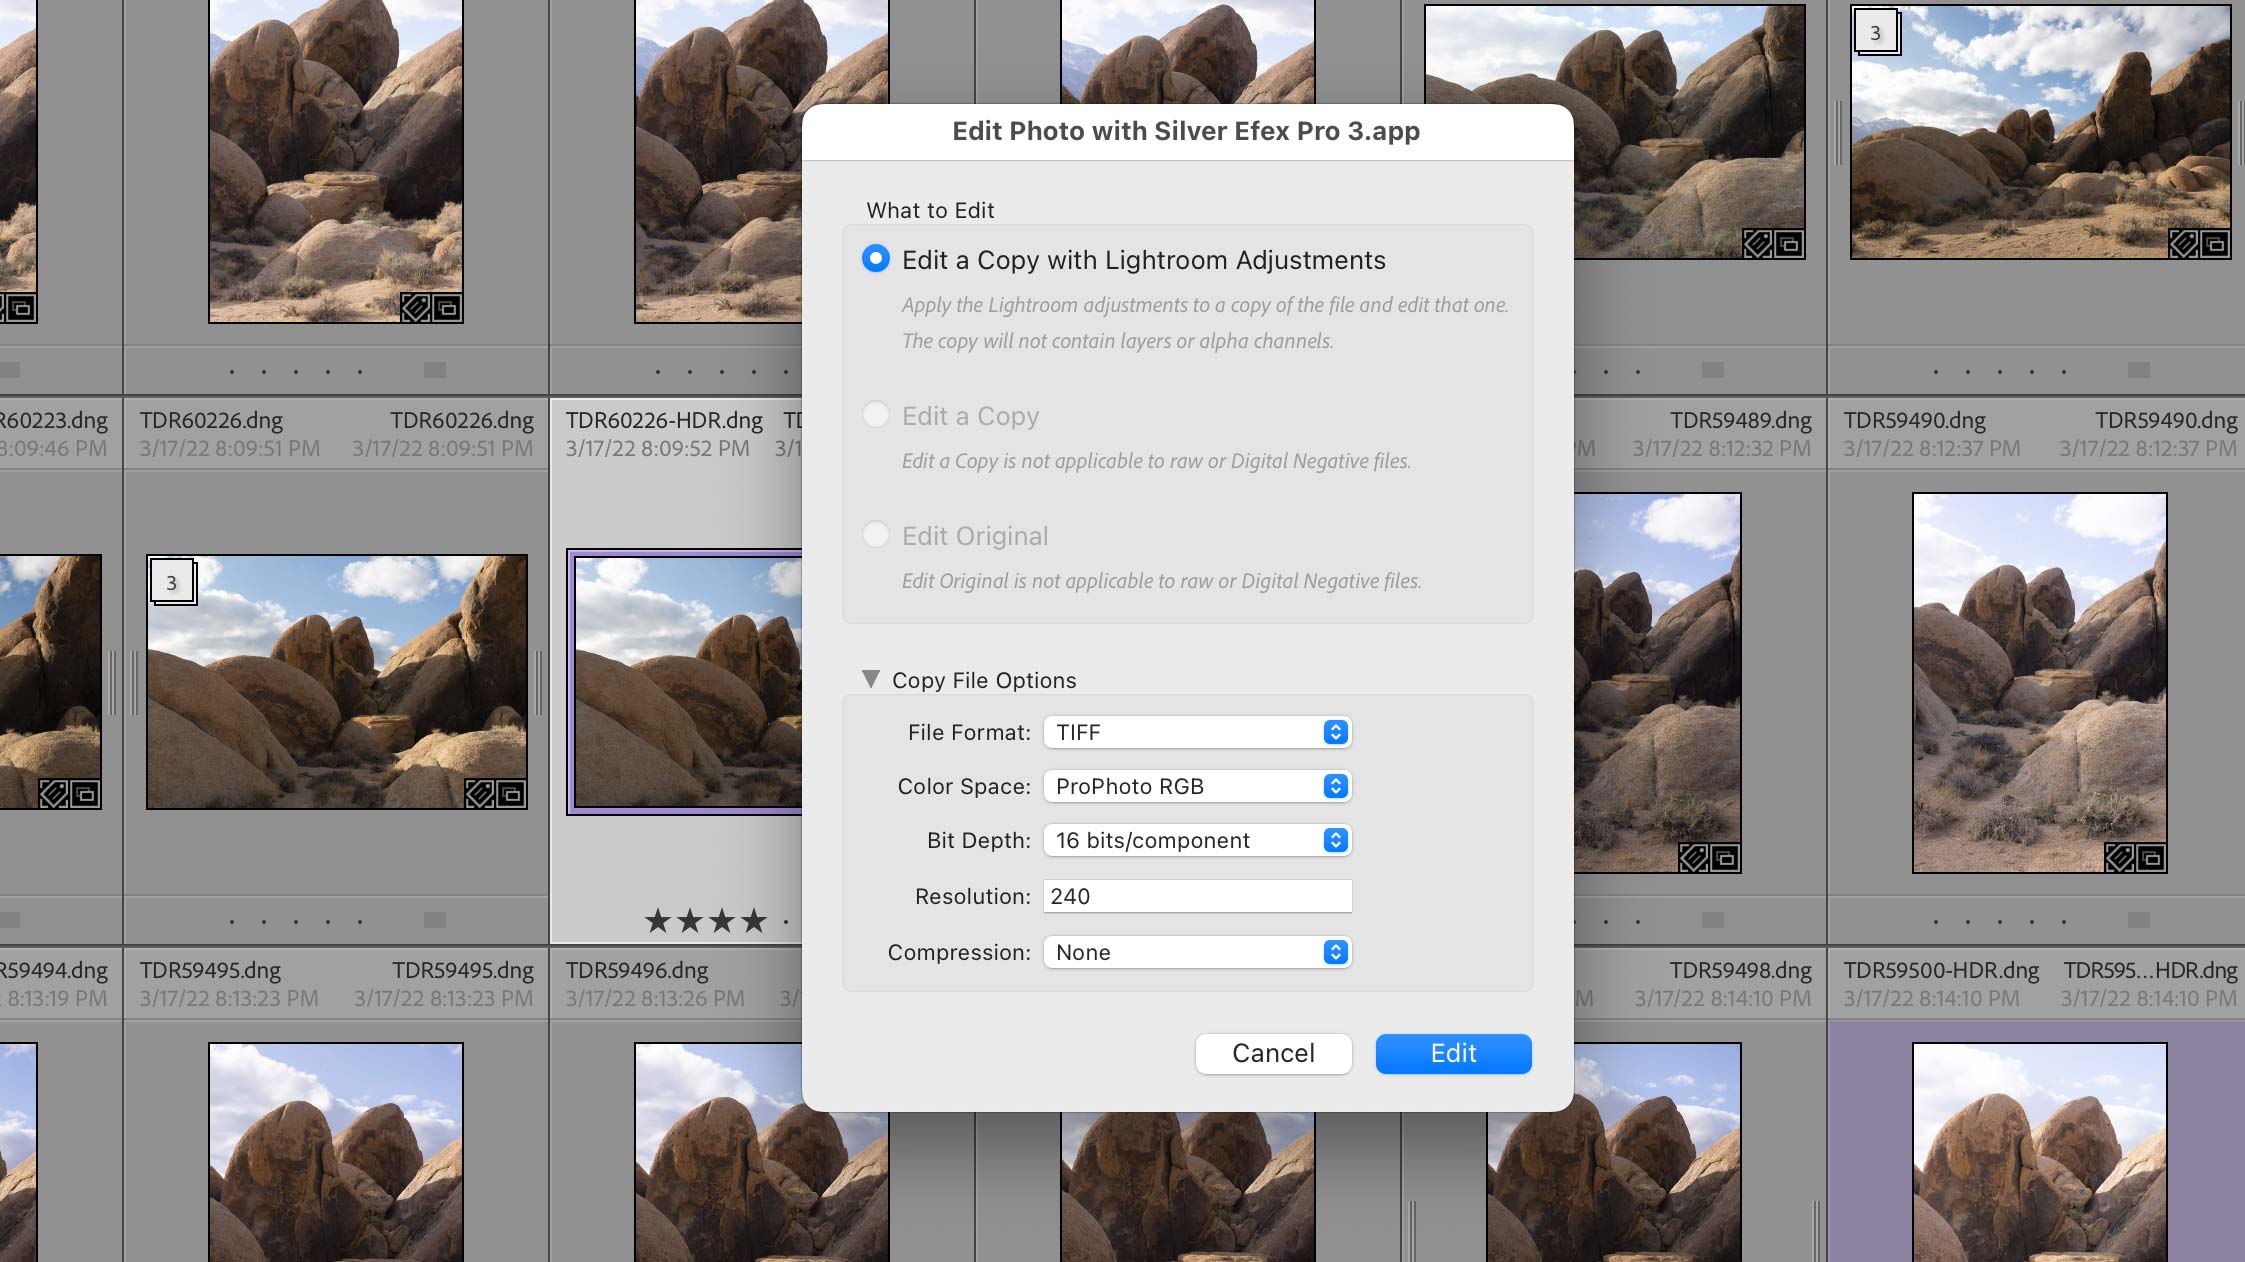 Edit options when opening a raw image from Lightroom in Silver Efex